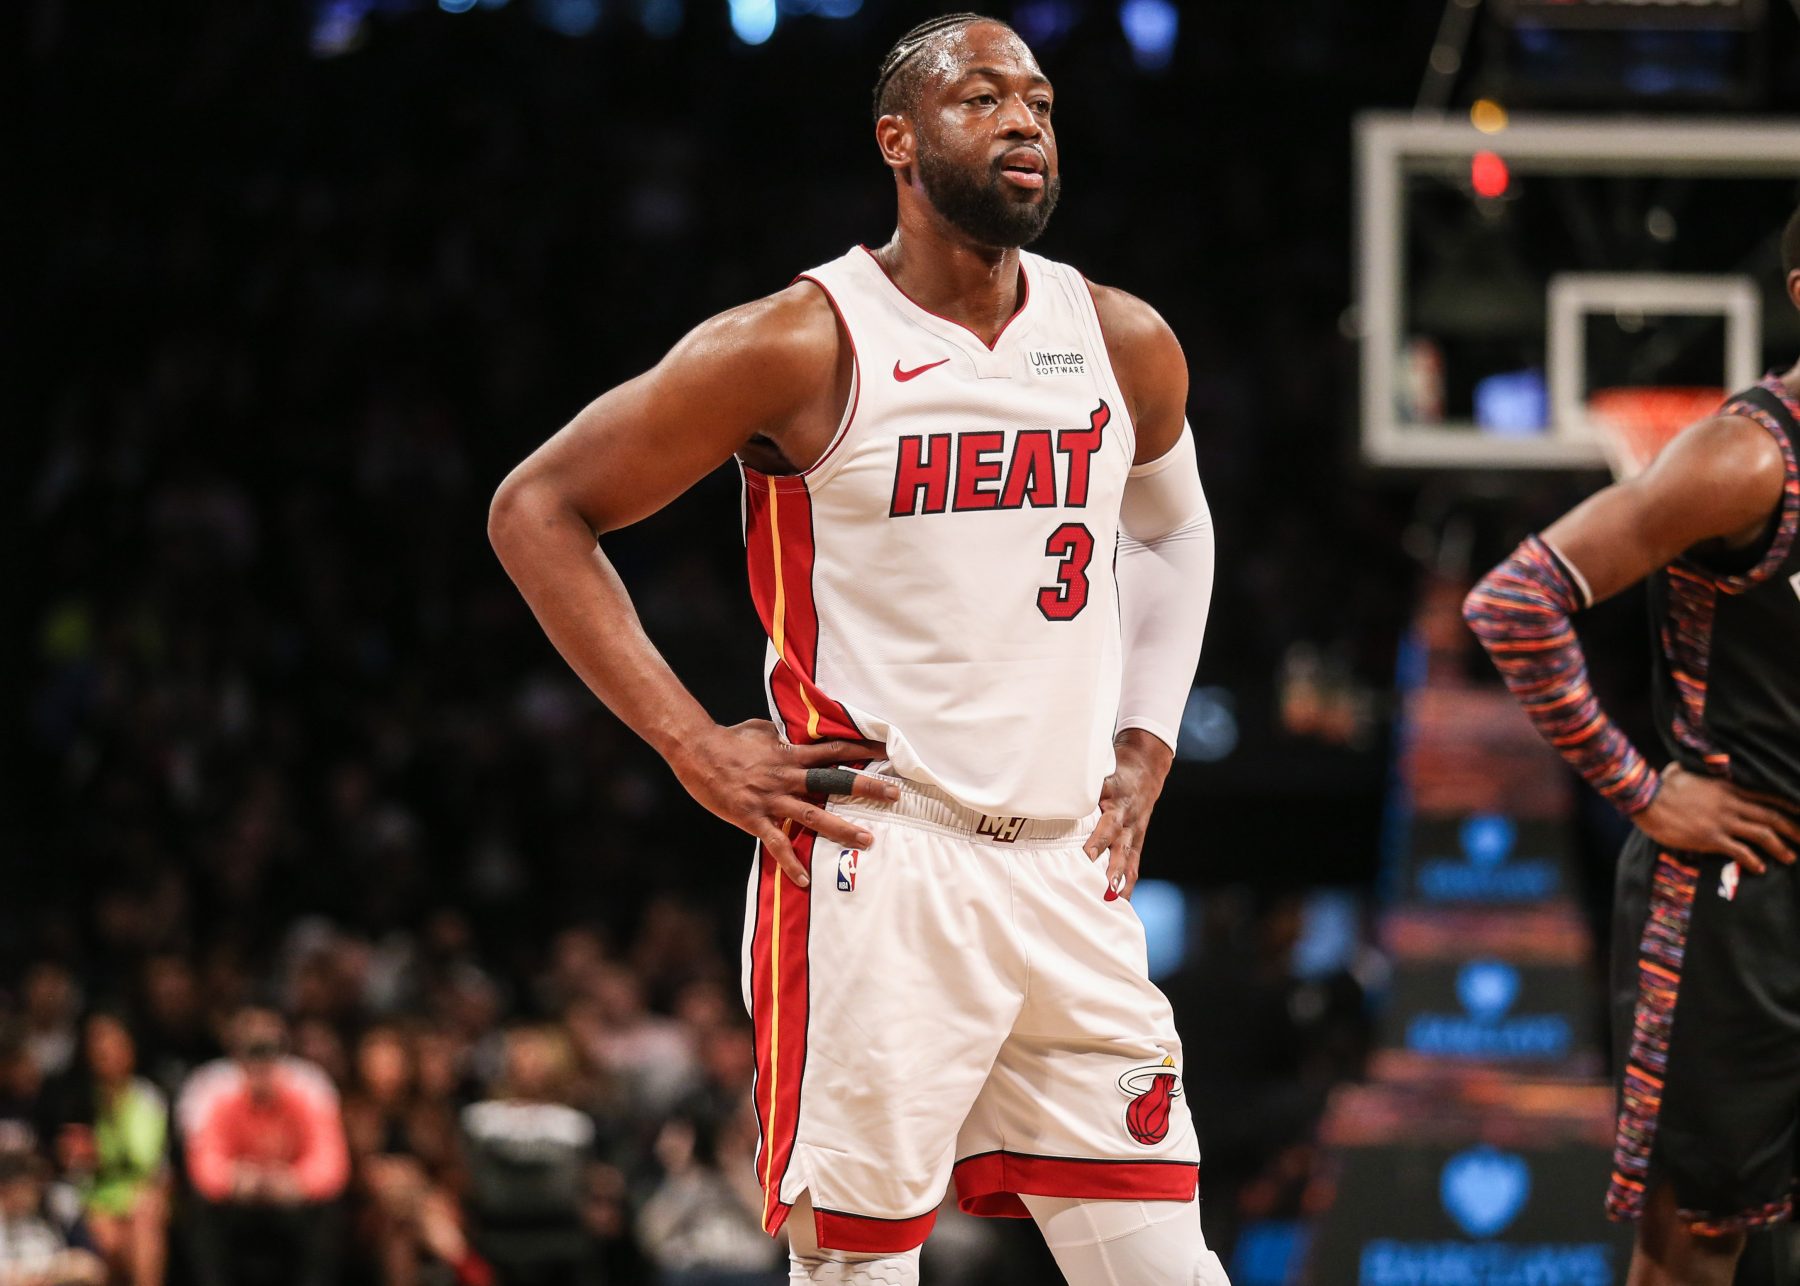 Dwayne Wade partners with Budweiser Zero for NFT collection